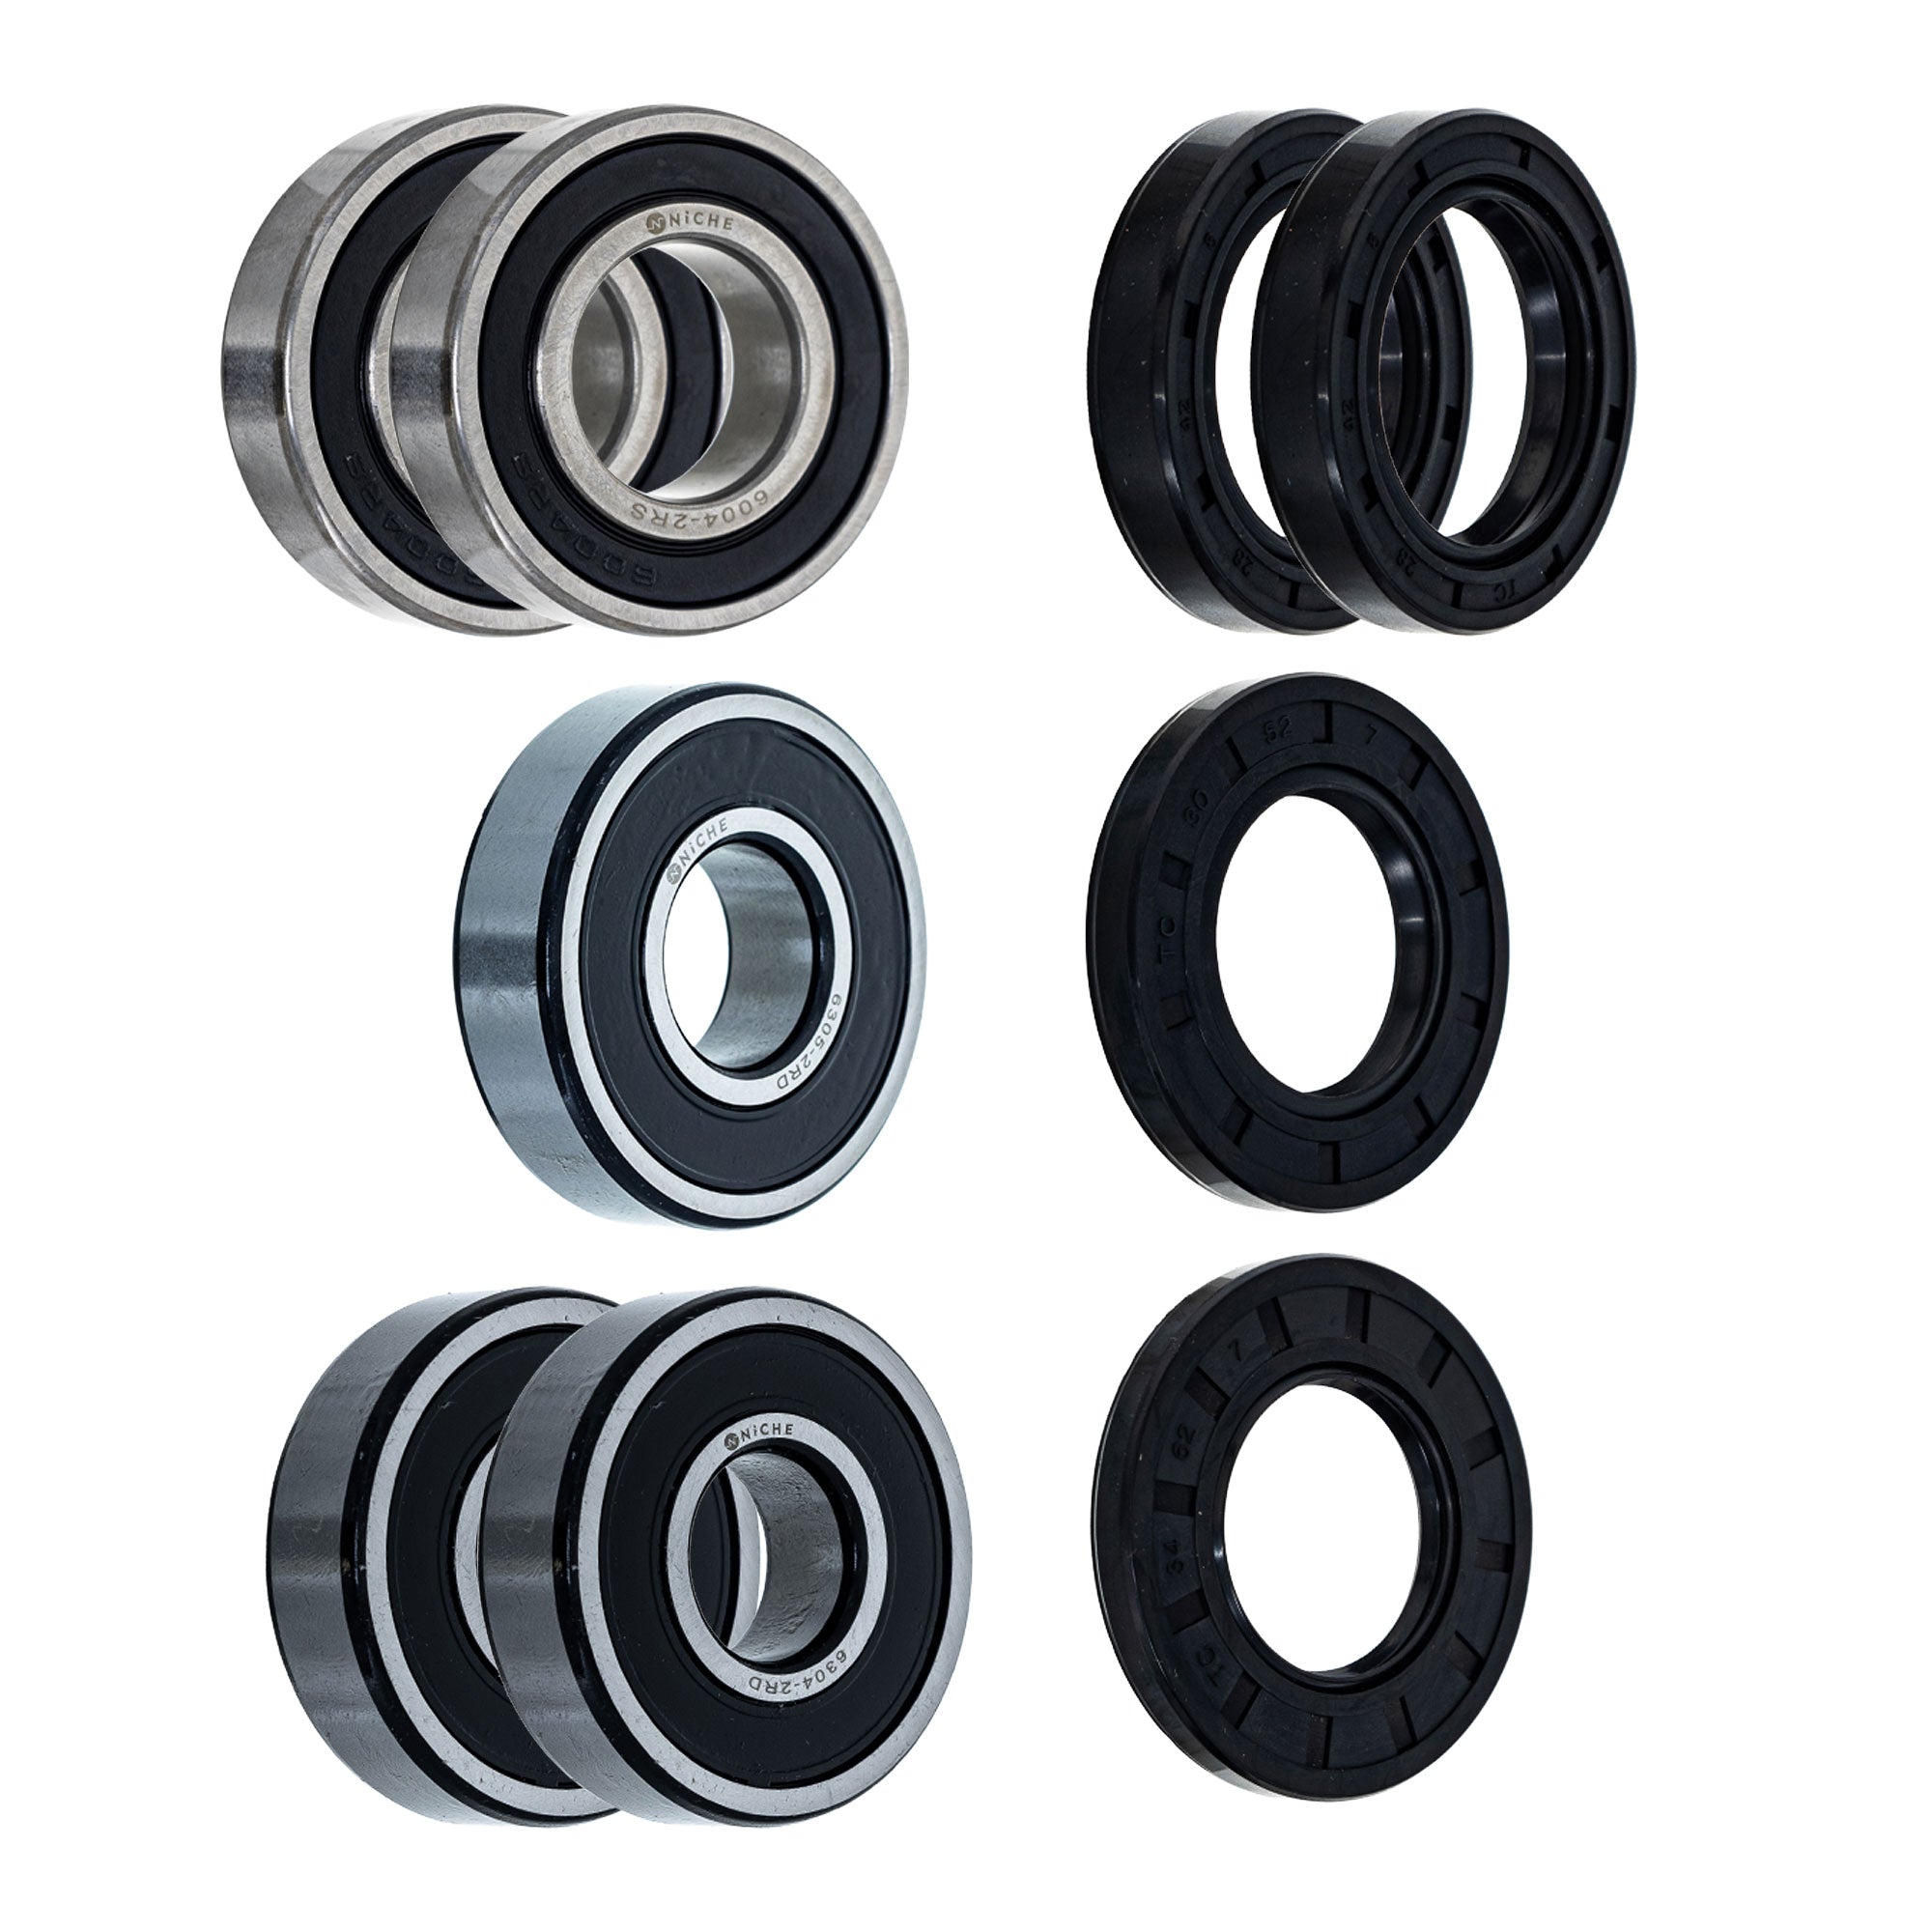 Wheel Bearing Seal Kit for zOTHER Ref No XR650R Super ST1100 Shadow NICHE MK1009268